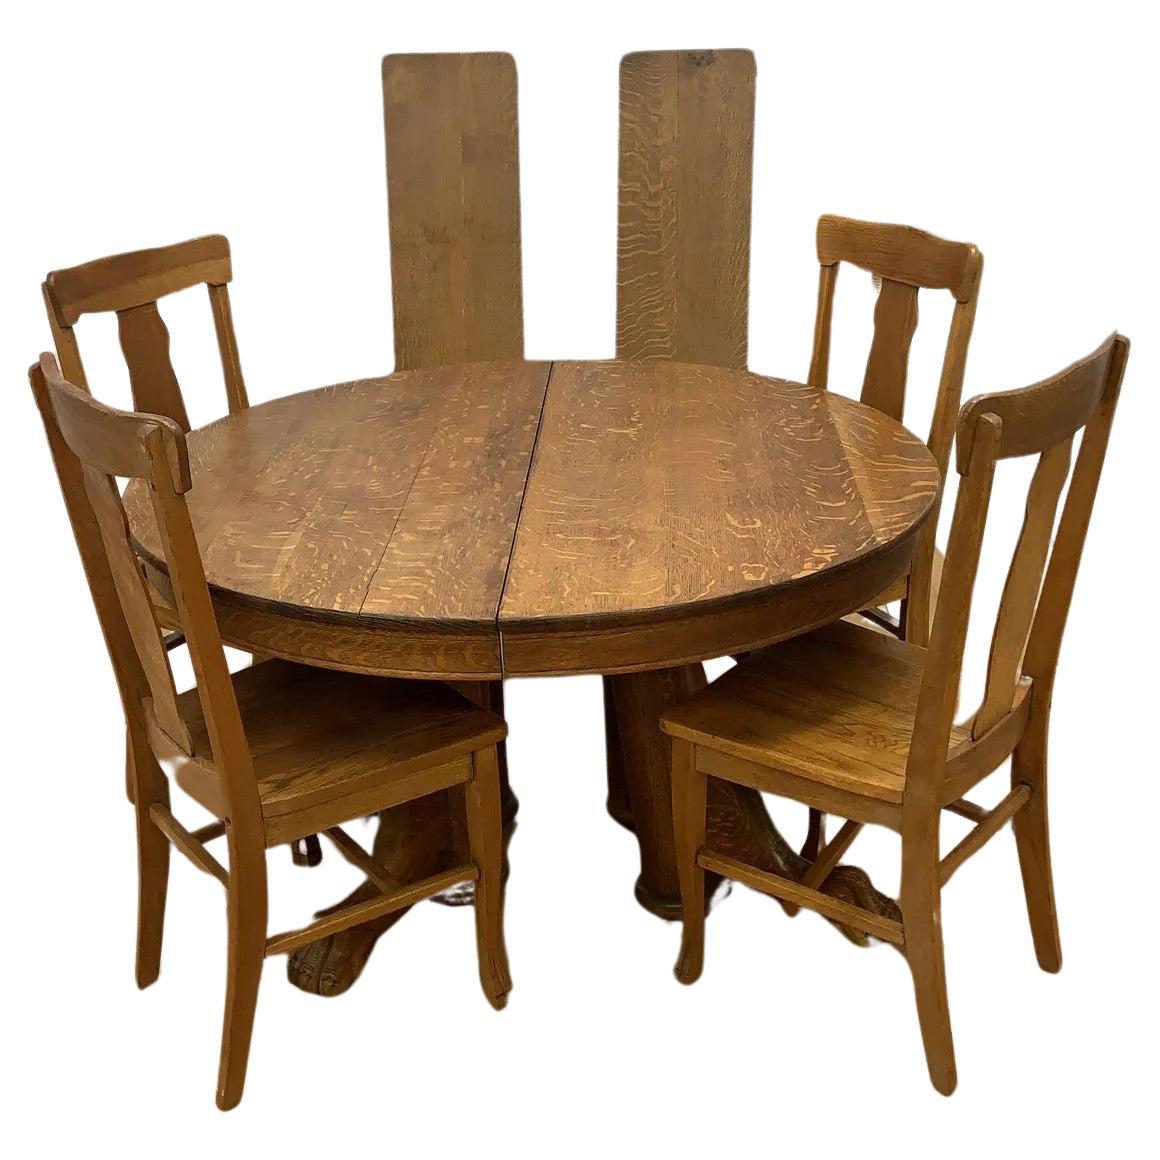 Antique Quarter Carved Lion Paw Foot 2 Leaf Dining/Game Table with 4 Chairs For Sale